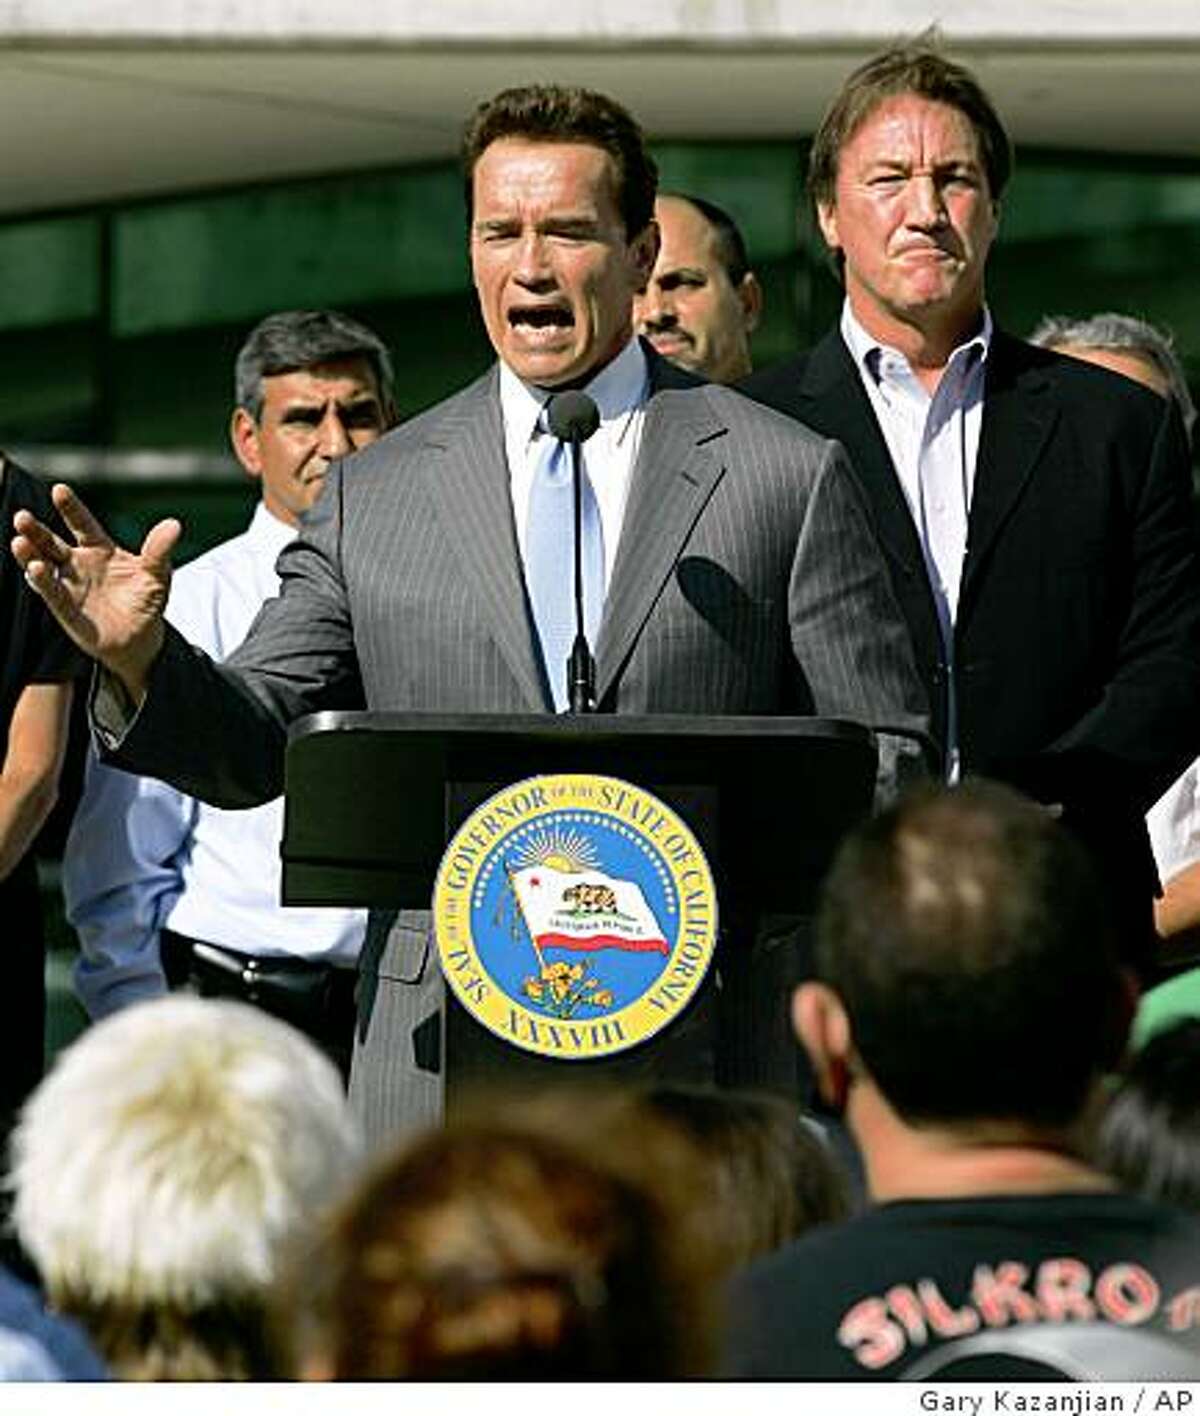 Gov. Arnold Schwarzenegger talks to the crowd at a budget rally as Mayor Alan Autry looks on Wednesday, Sept. 17, 2008 in Fresno, Calif. The state's political dysfunction reached a new low this week with Gov. Arnold Schwarzenegger vowing the first veto of a California budget in modern history. The spat goes beyond the numbers; it's about what may be the governor's last chance to hammer out a fiscal legacy. (AP Photo/Gary Kazanjian)